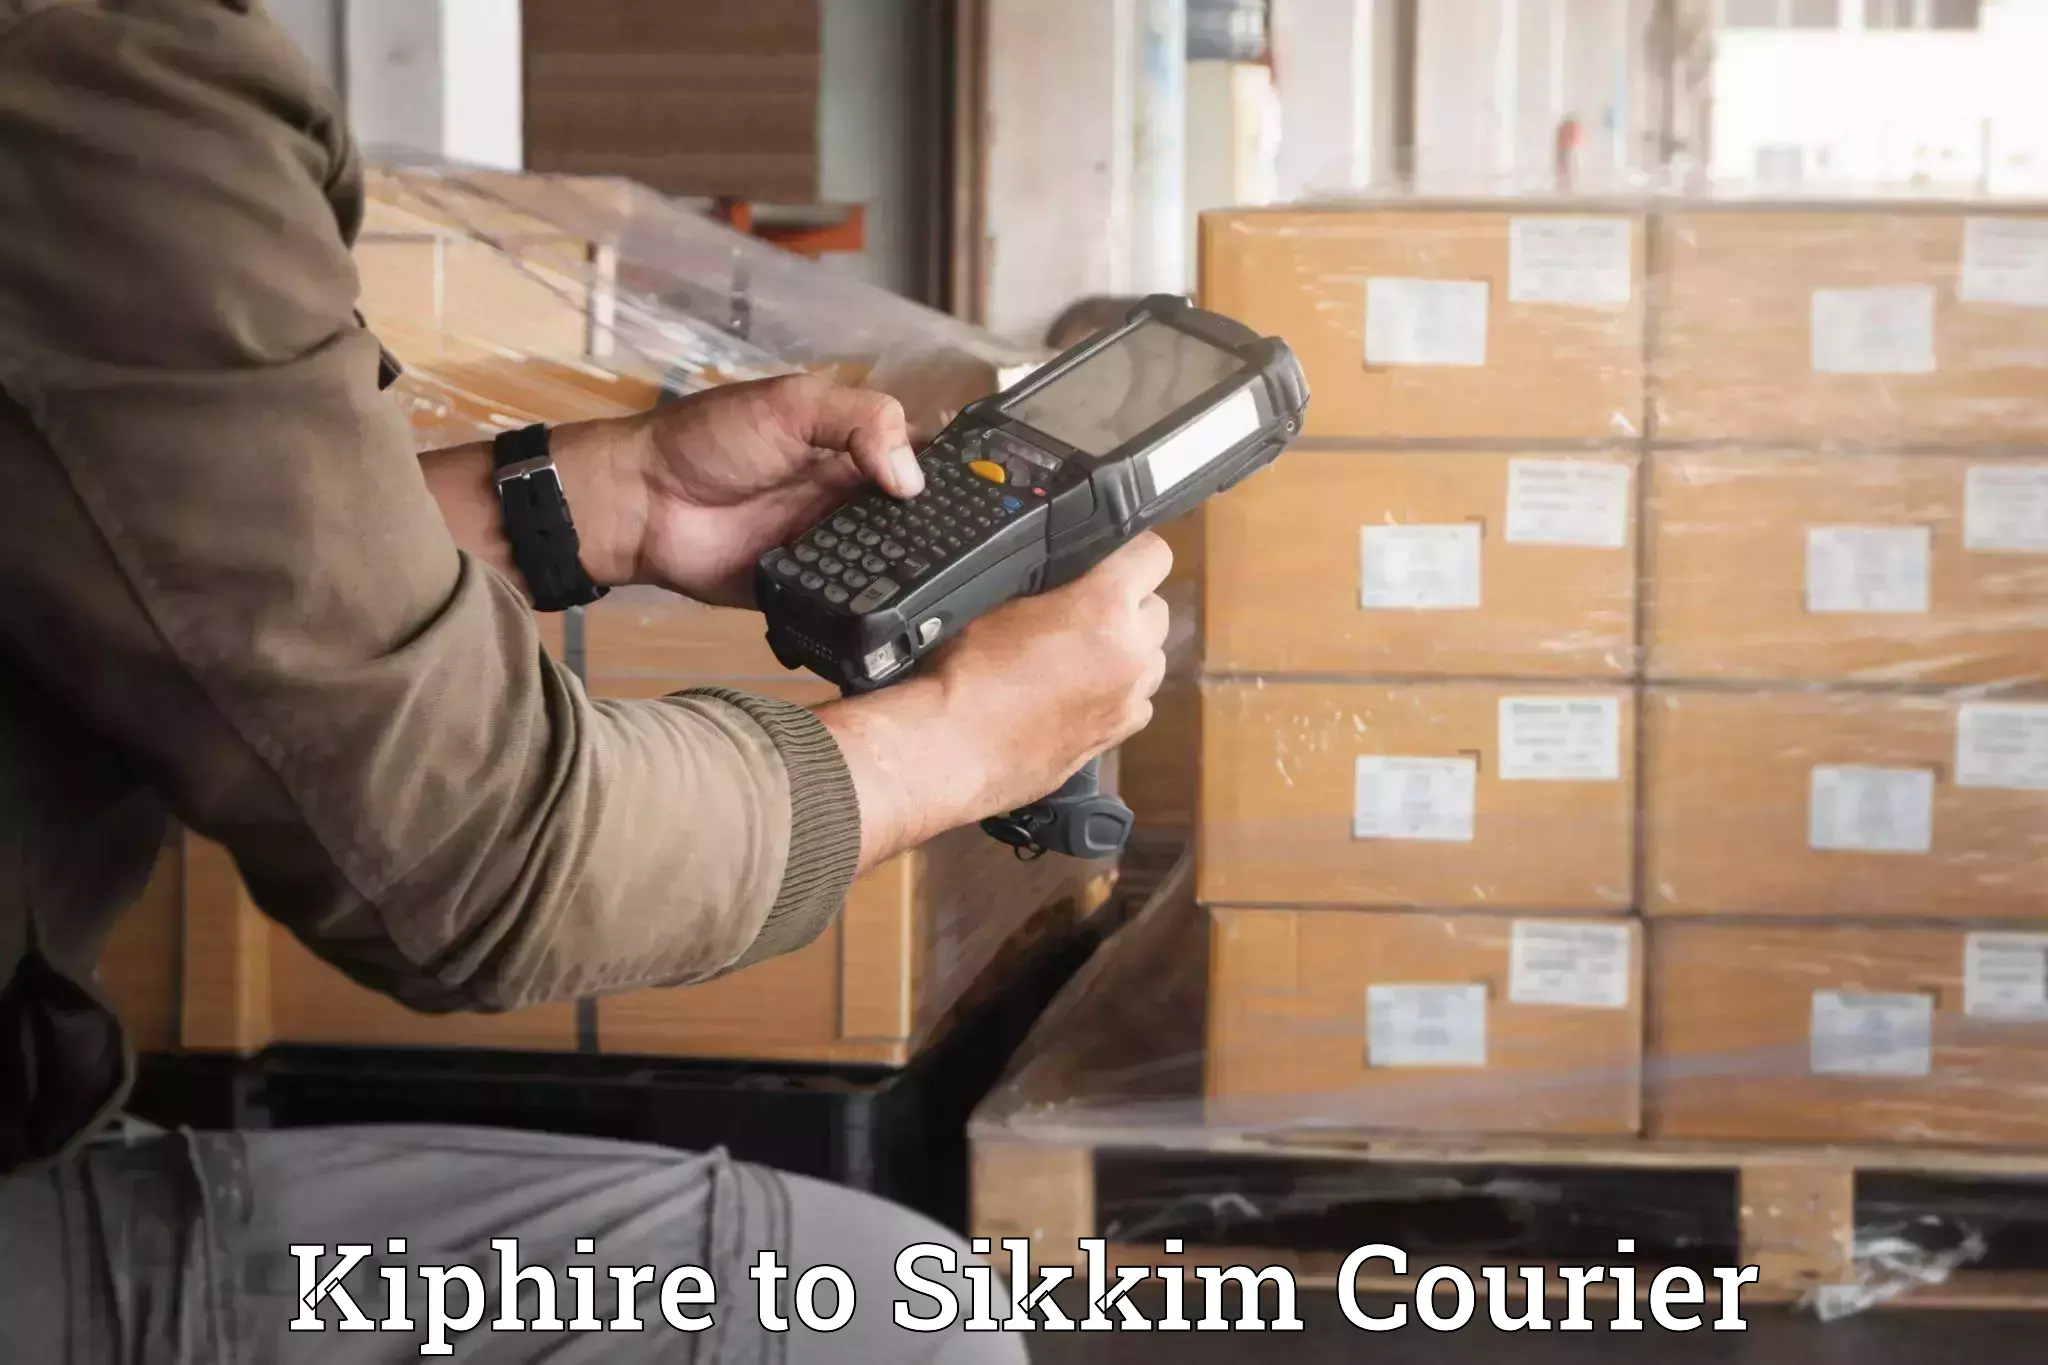 Specialized moving company Kiphire to Pelling